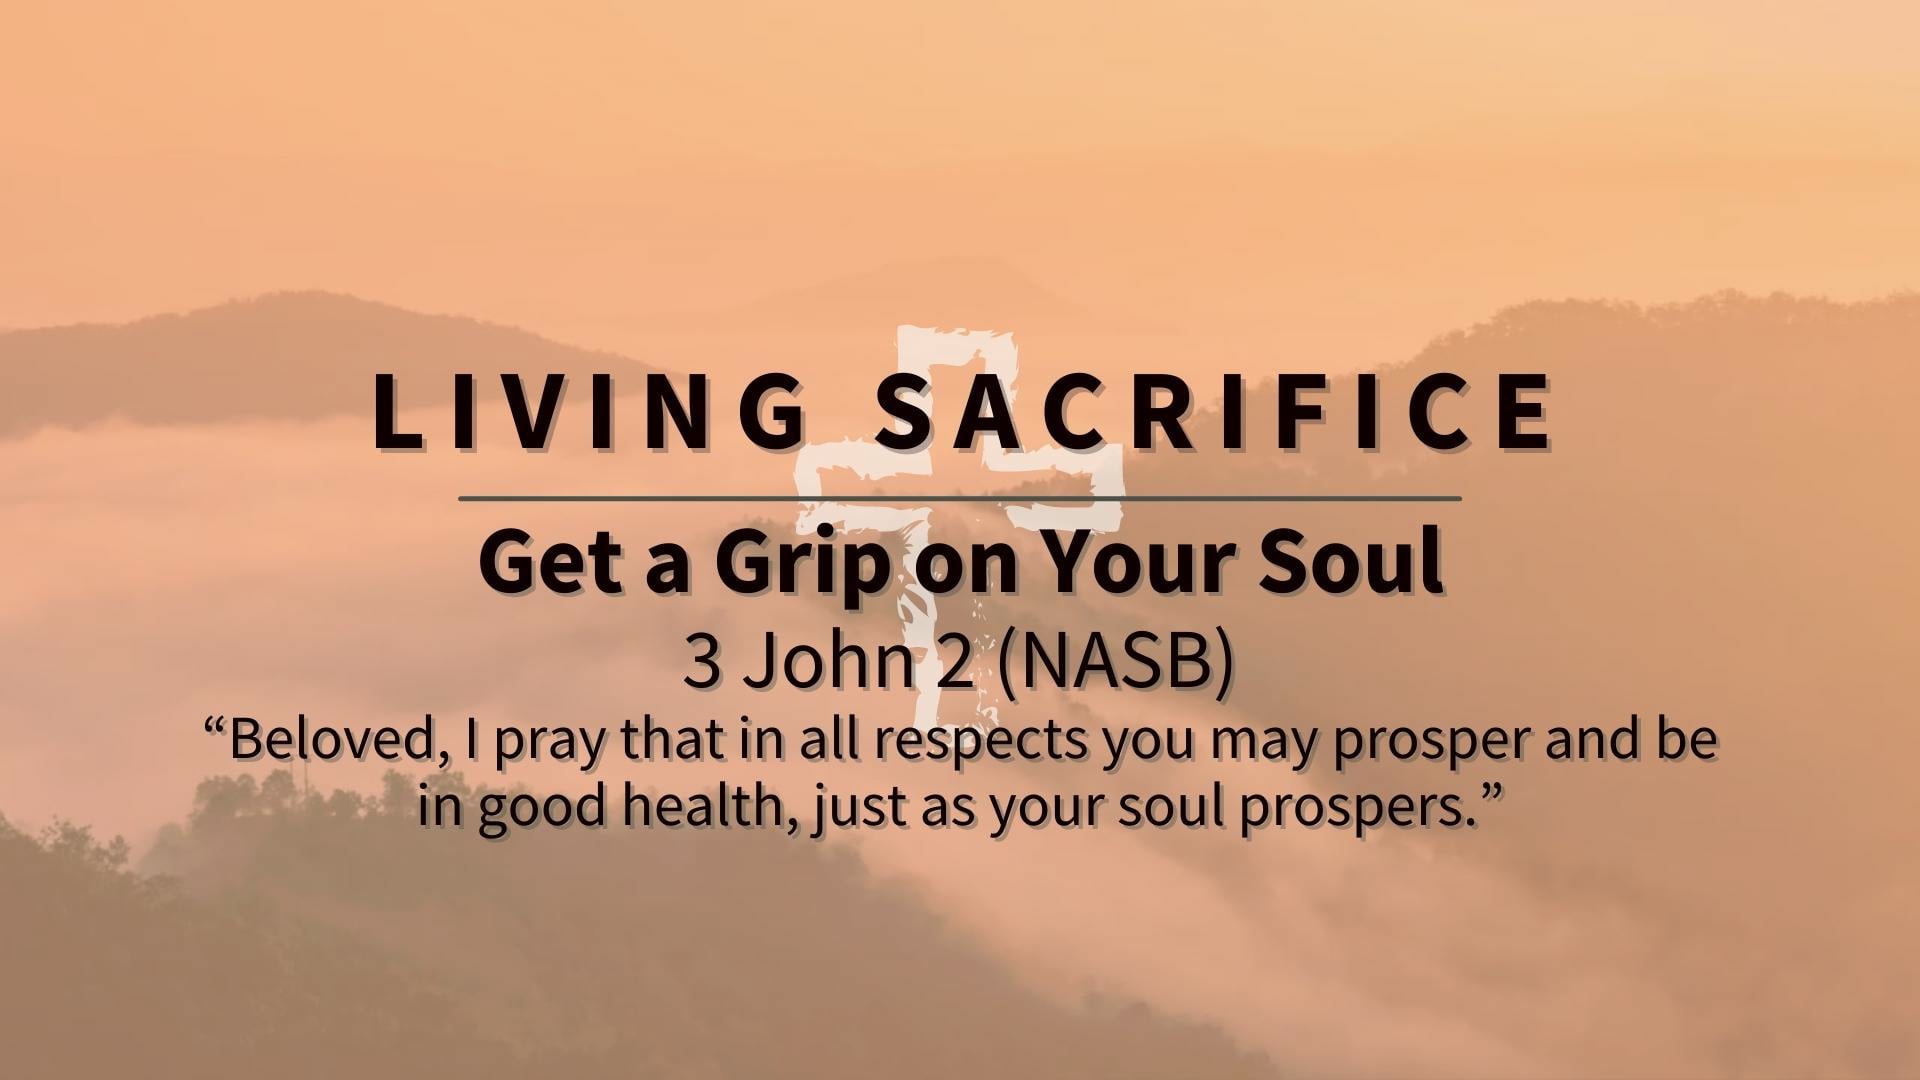 Get a Grip on Your Soul - February 13, 2022